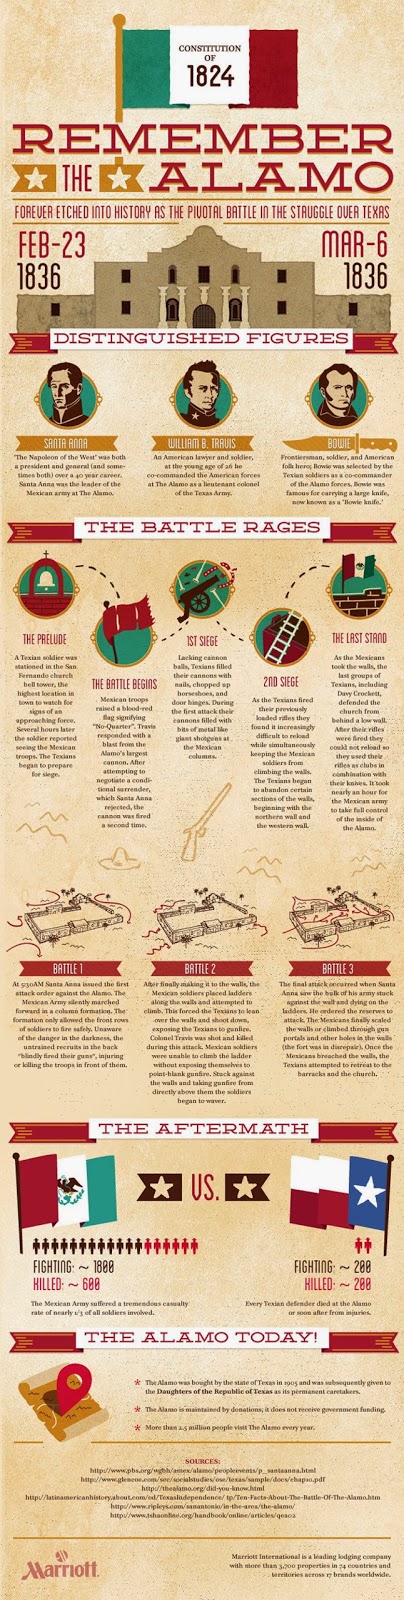 All you need to know about the Alamo - Infographic {San Antonio, Texas}